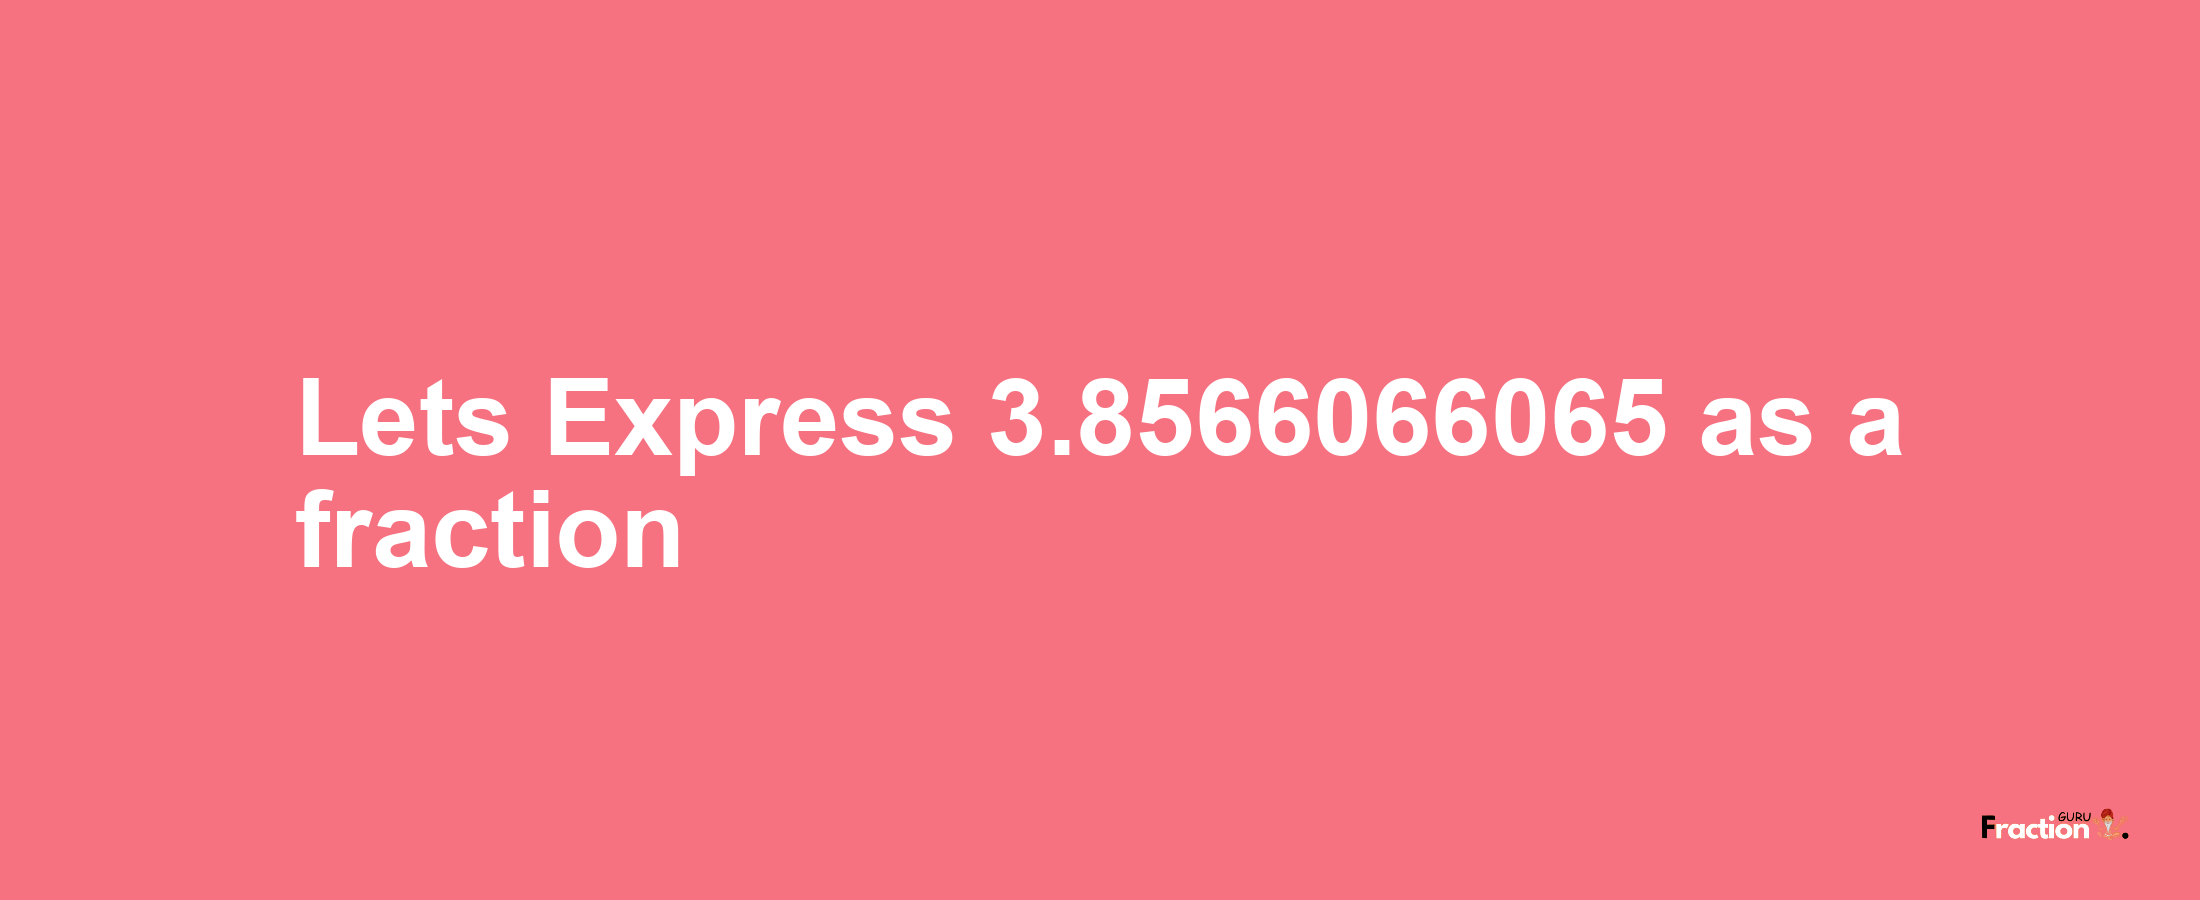 Lets Express 3.8566066065 as afraction